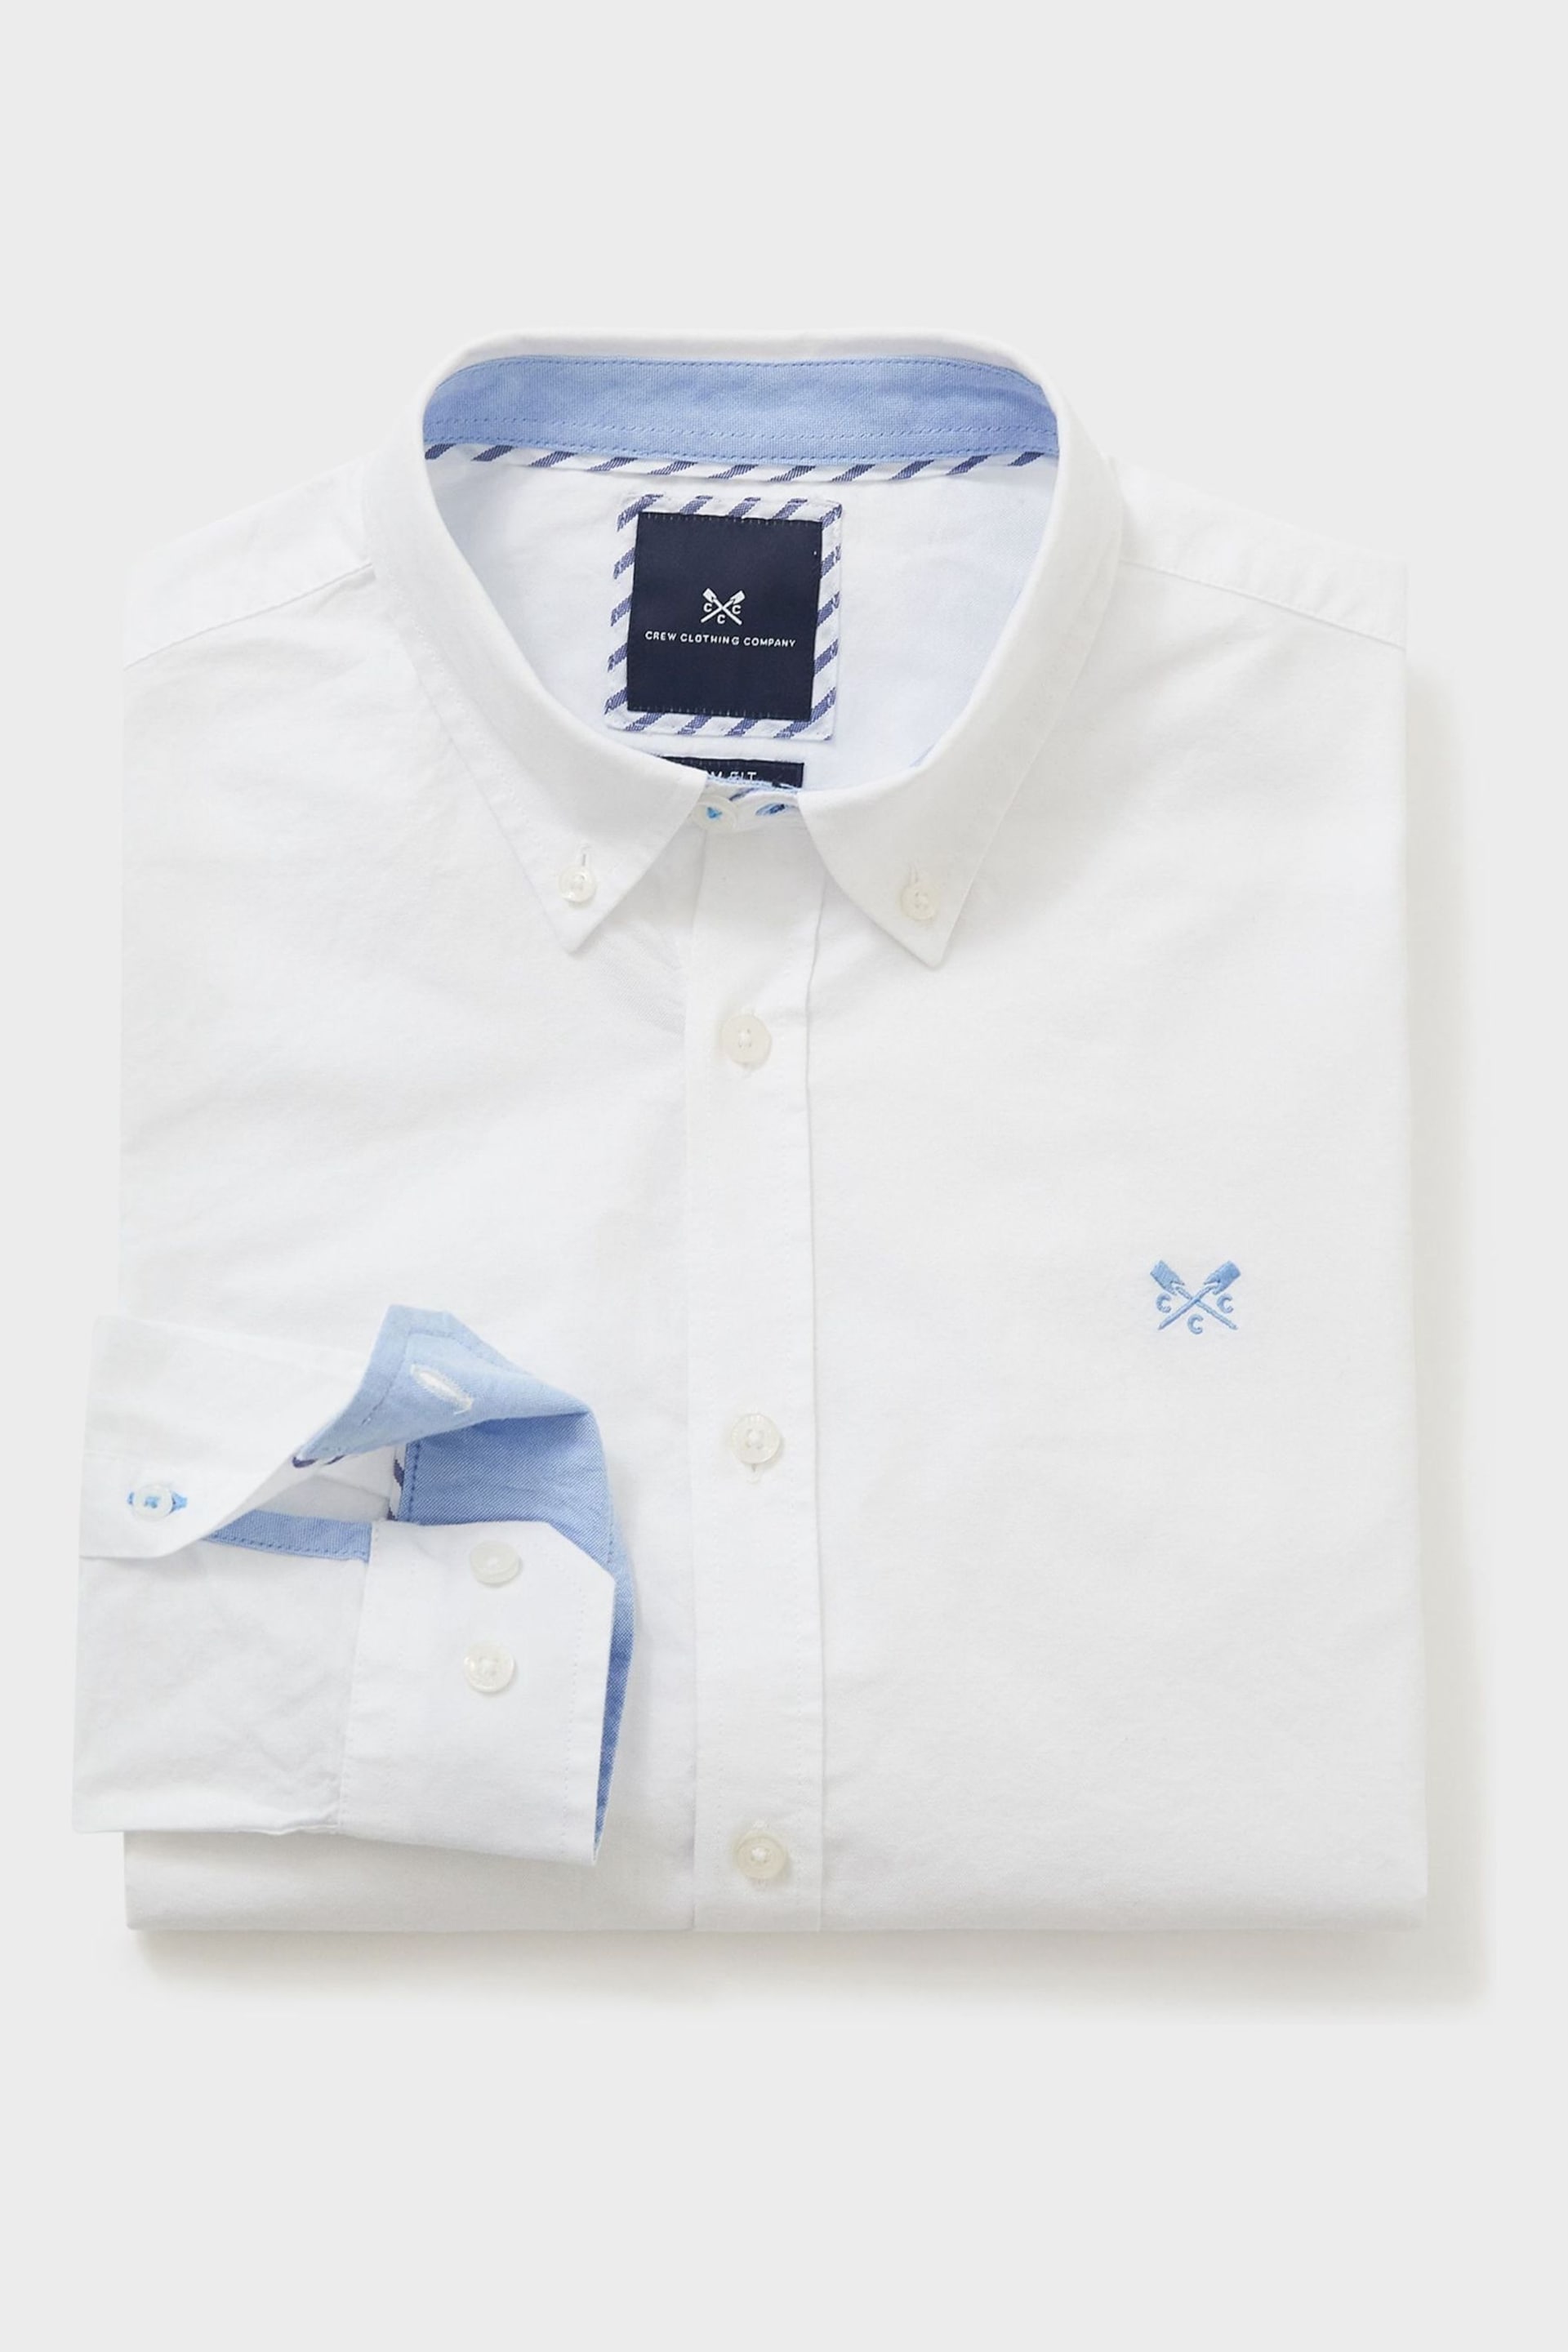 Crew Clothing Classic Fit Oxford Shirt - Image 4 of 4